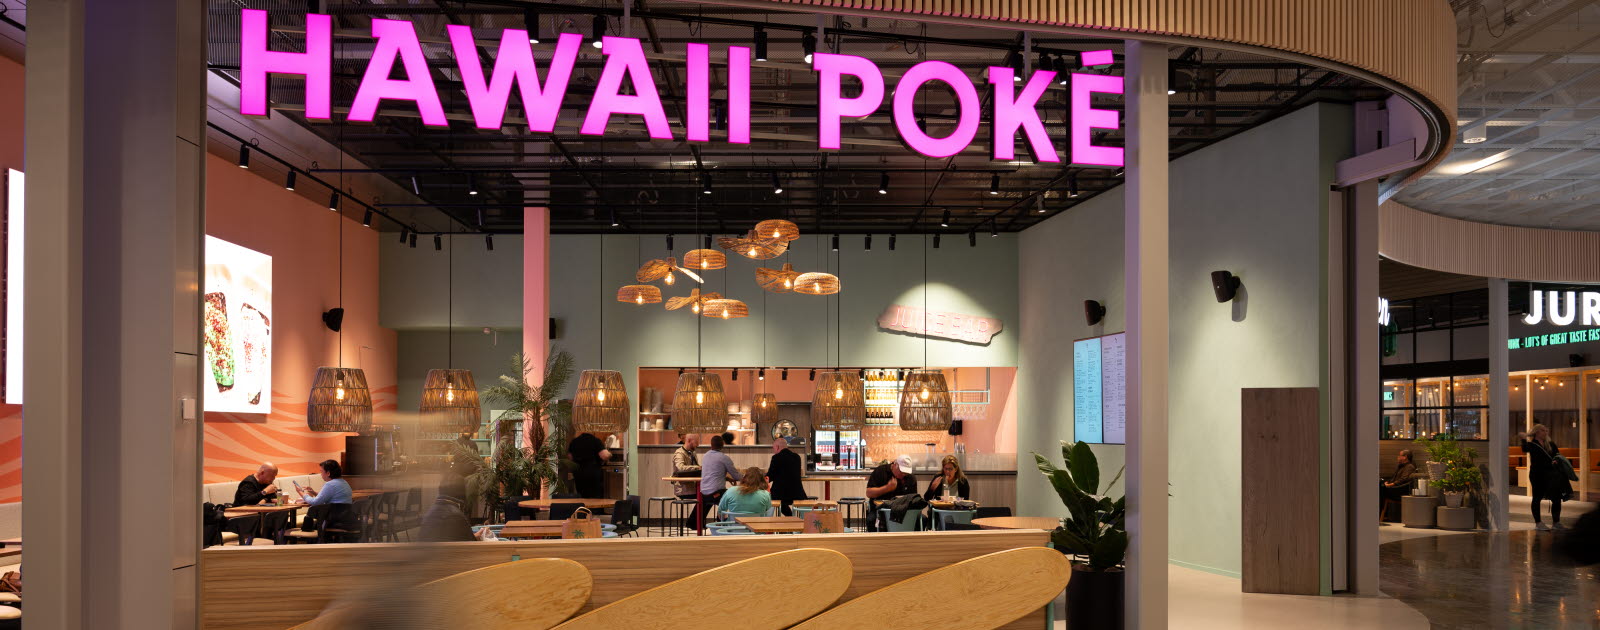 Restaurant with turqoise and coral walls, surfing inspired decor and a large neon pink "Hawaii Poké" sign.